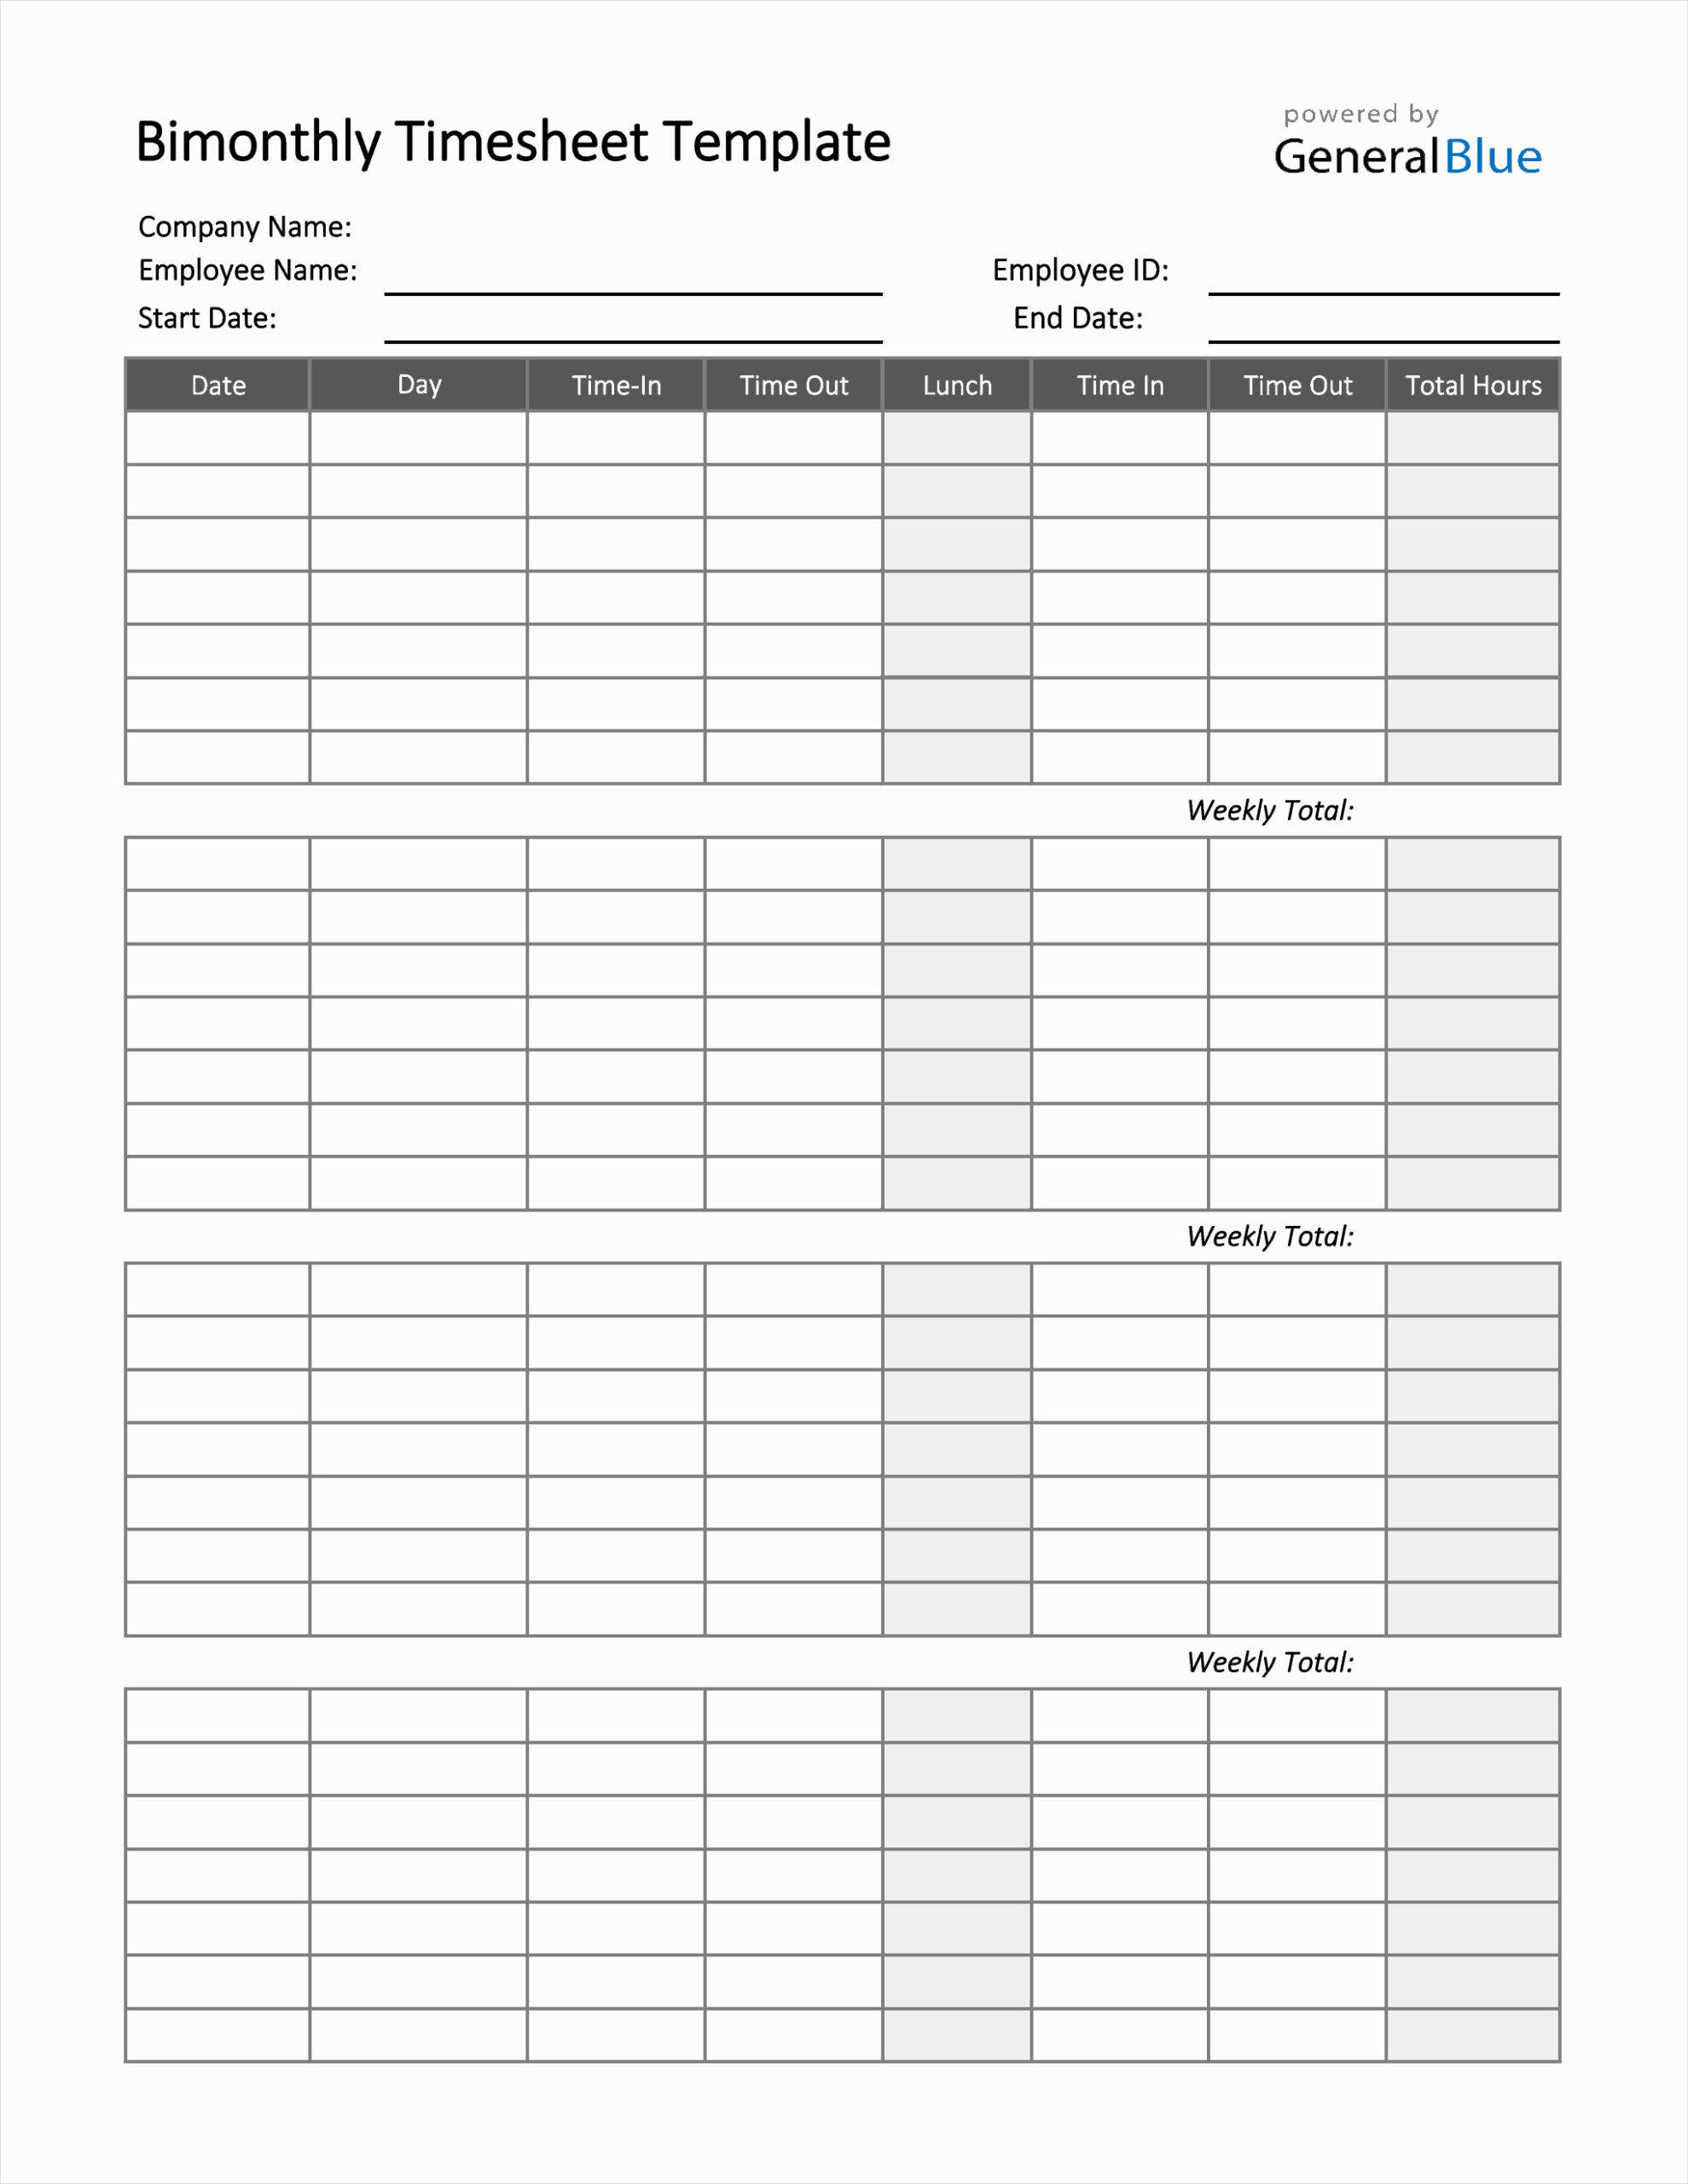 sample of bi monthly timesheet template